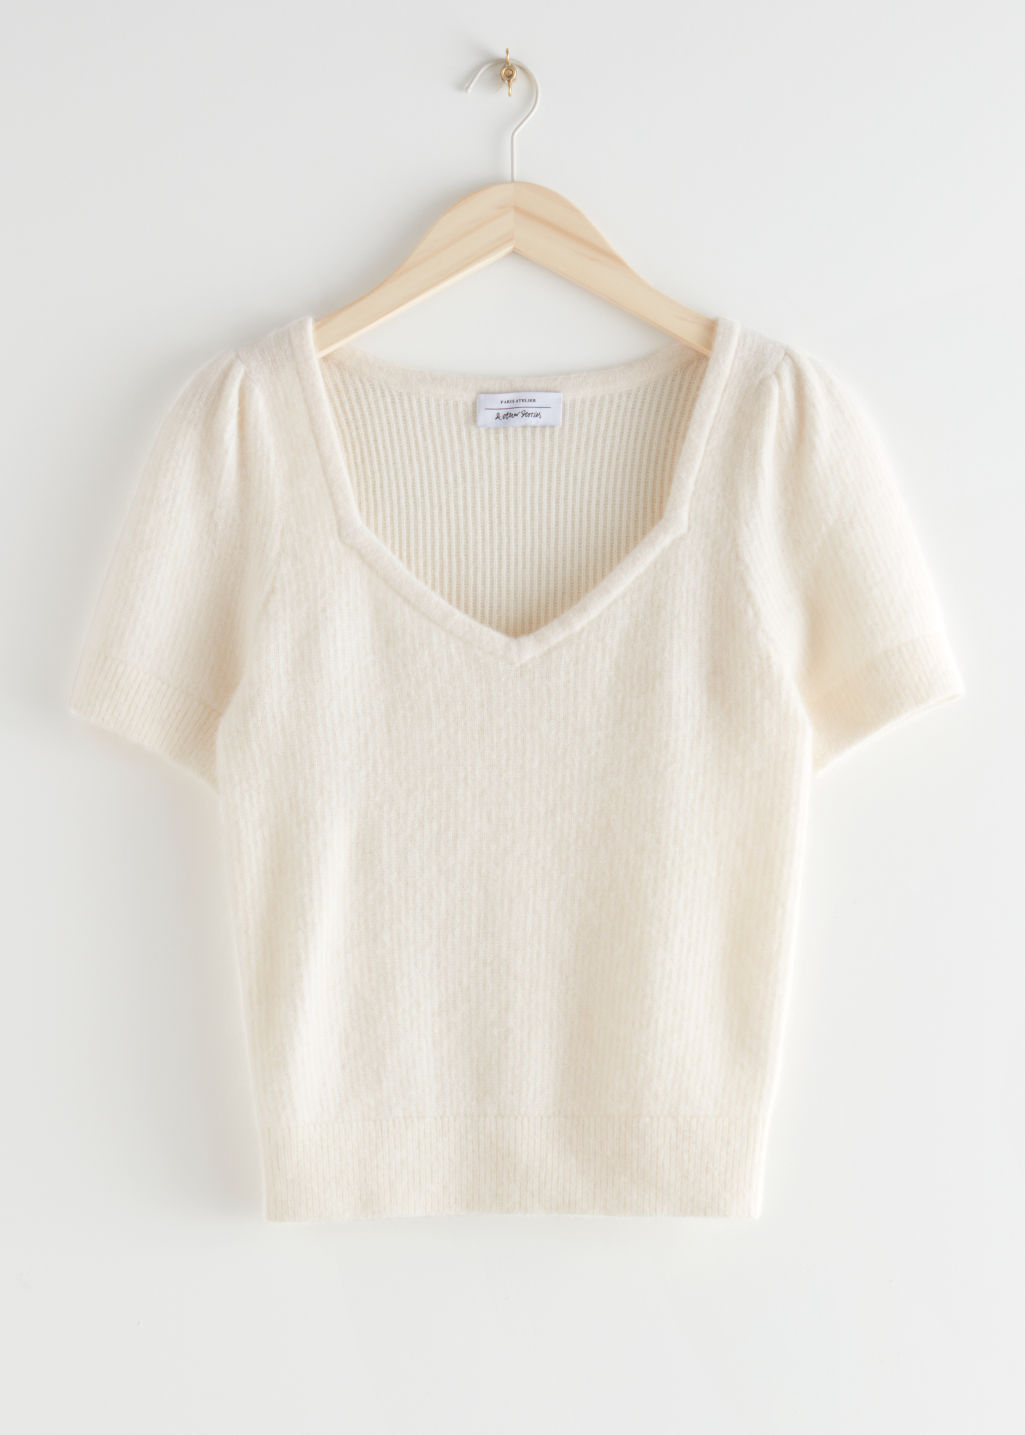 Sweetheart Neck Knit Sweater - Pink - Tops & T-shirts - & Other Stories